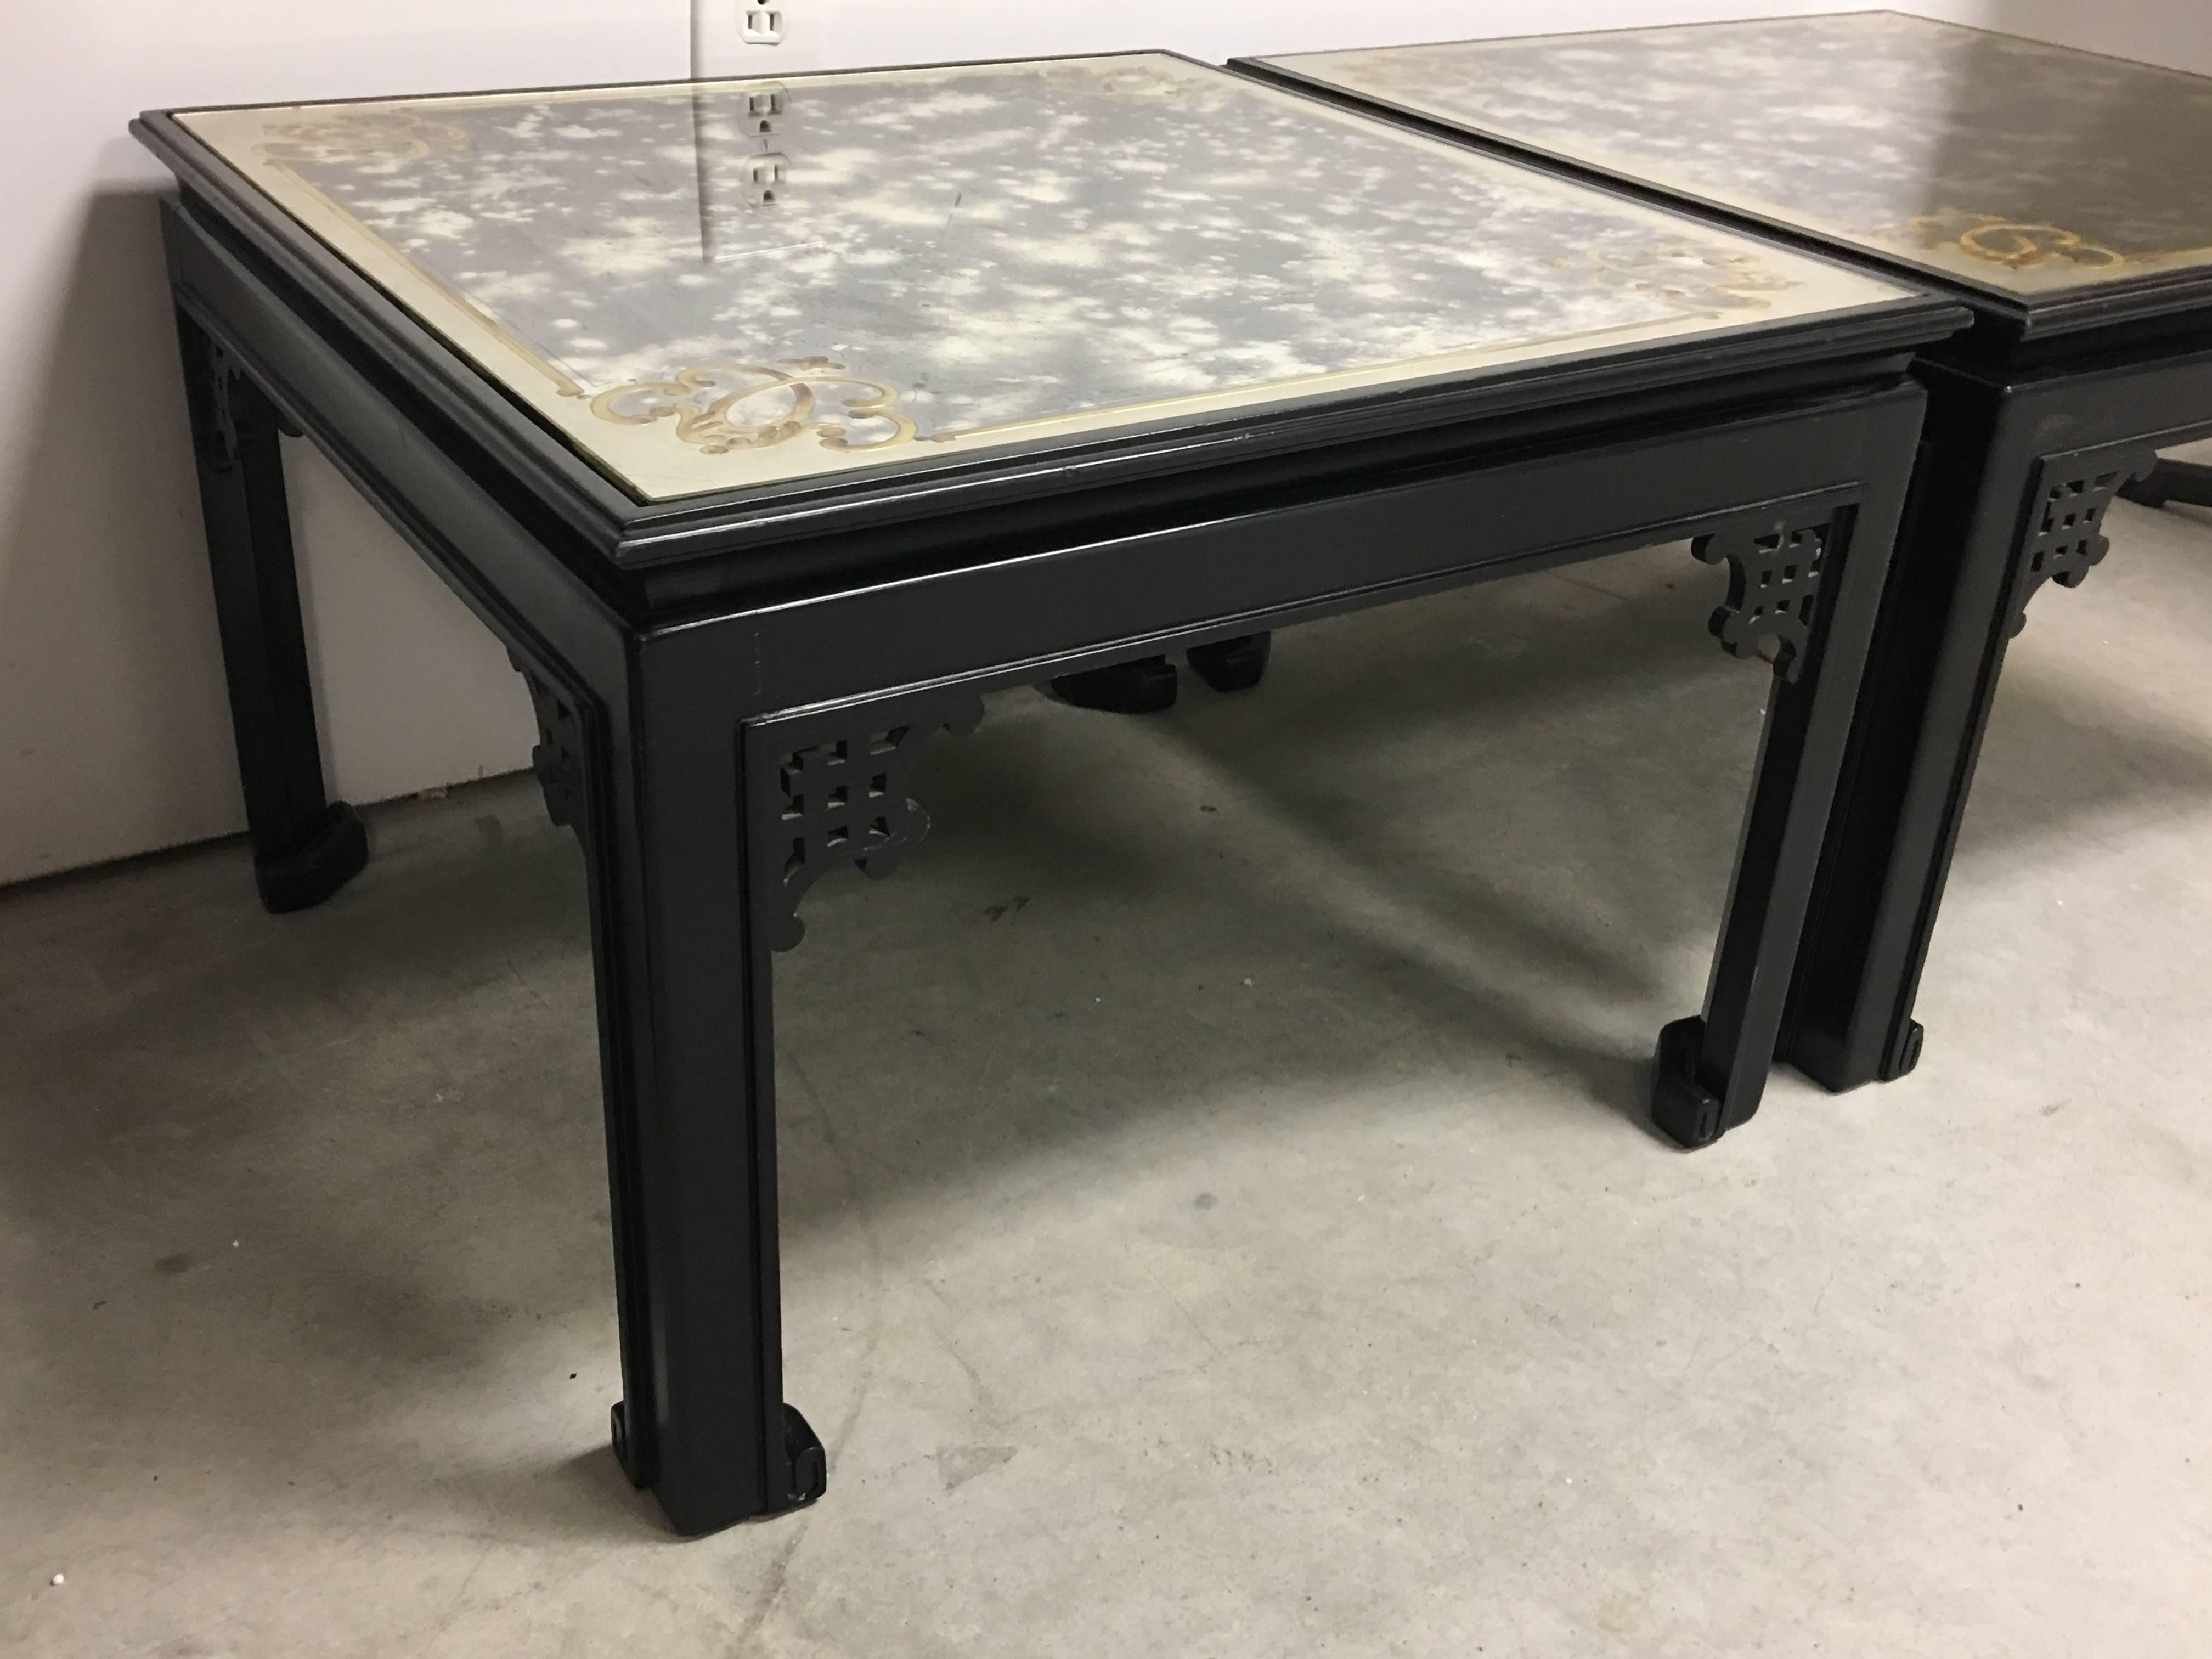 Offered is a stunning, pair of 1960s Maison Jansen black ebonized side tables with gold and silver decorated glass. The bases feature a Ming-style fretwork and footwork. Minor scratches on the glass surface, though nothing terribly noticeable.